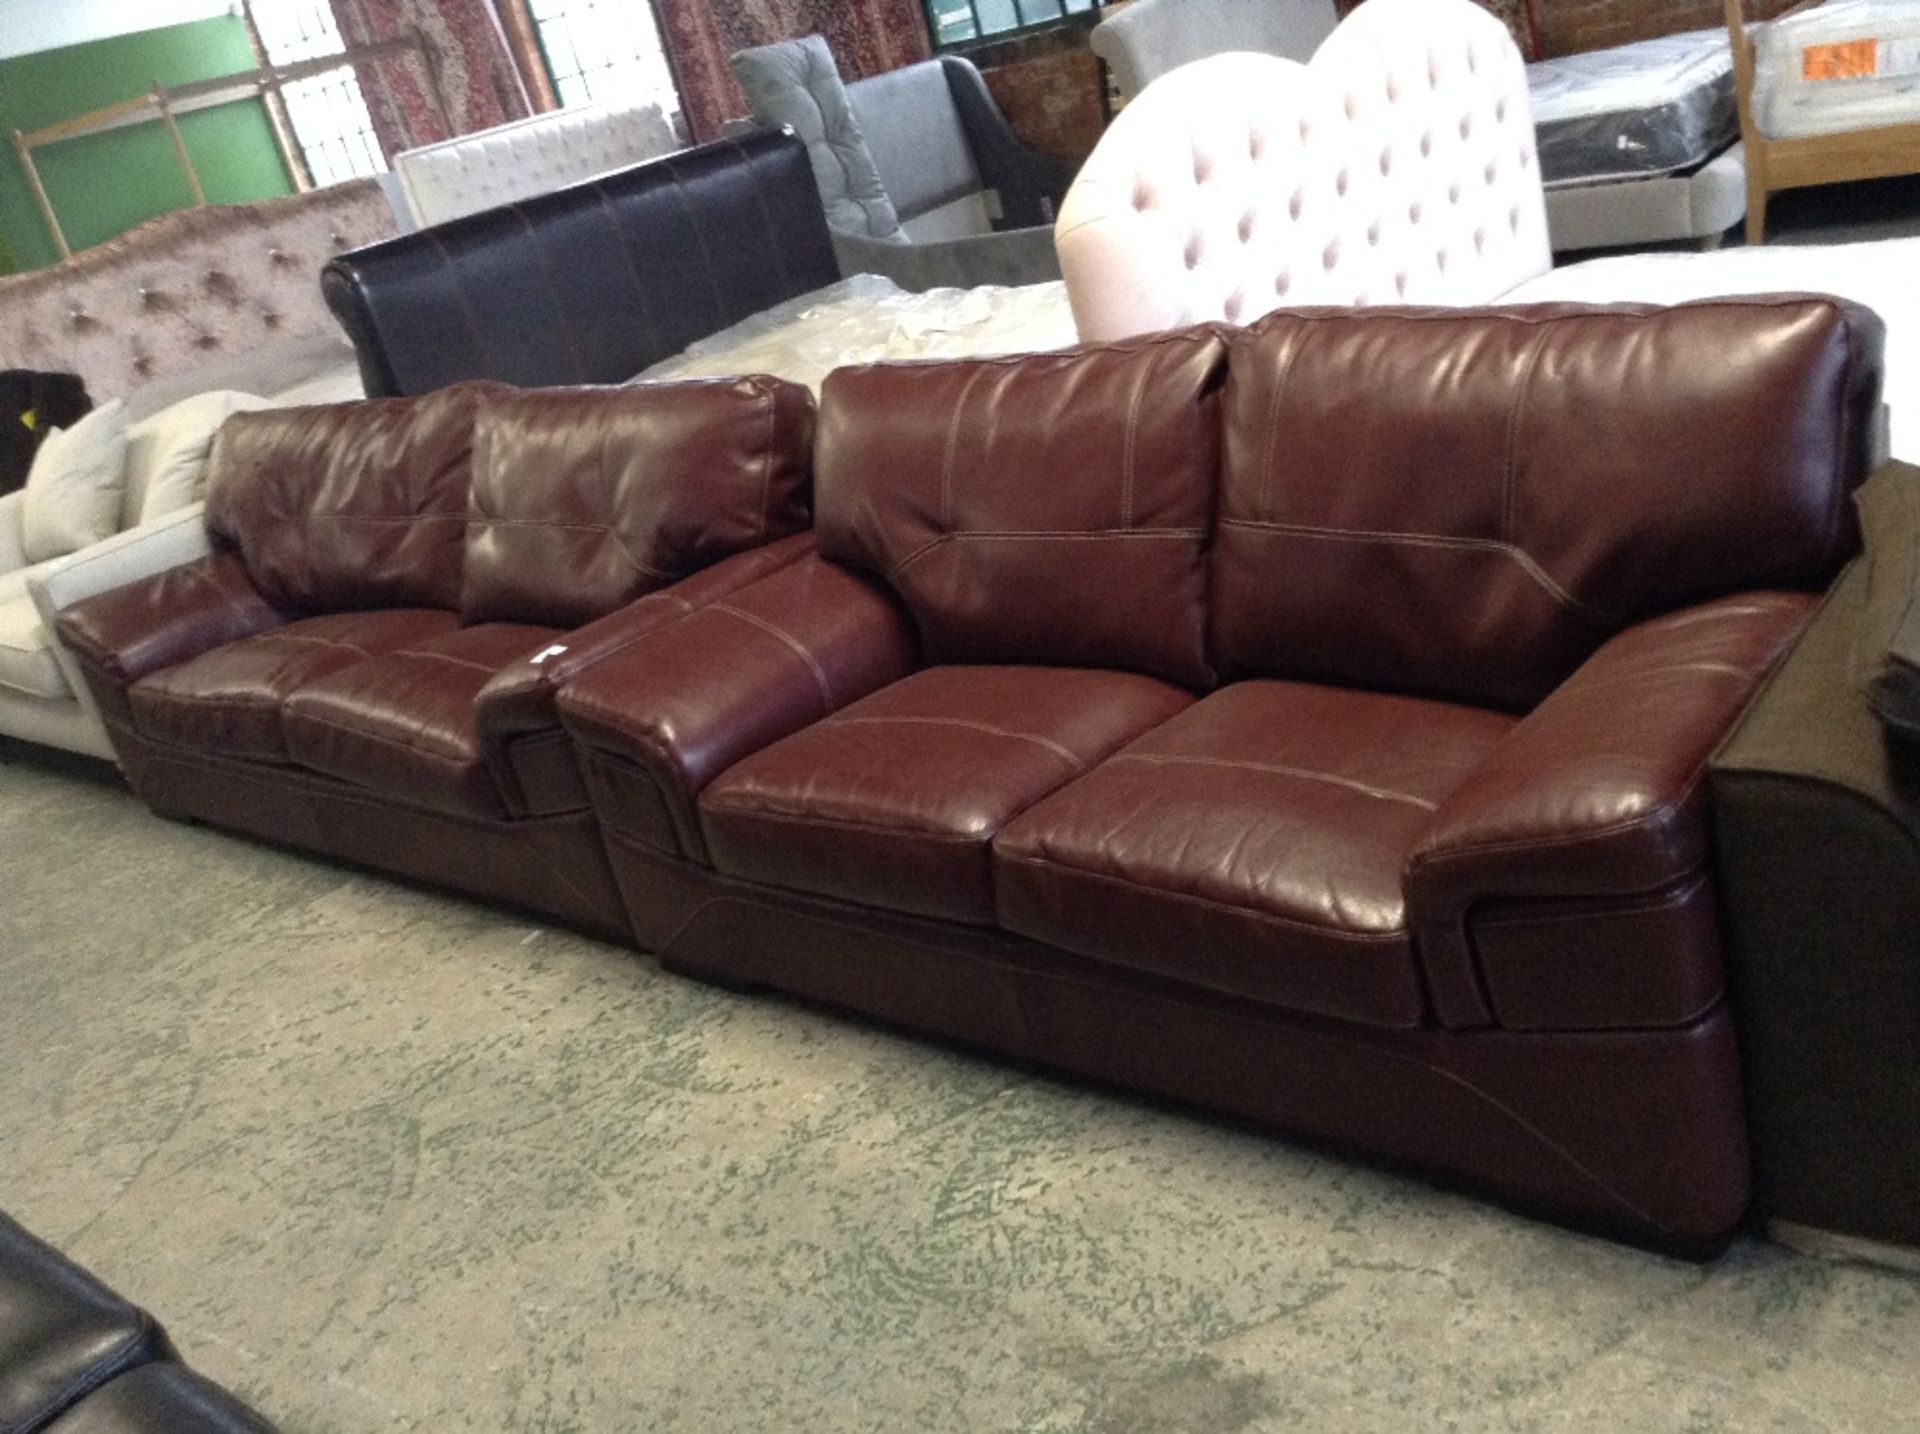 RED ENDURANCE LEATHER 3 SEATER SOFA AND 2 SEATER S